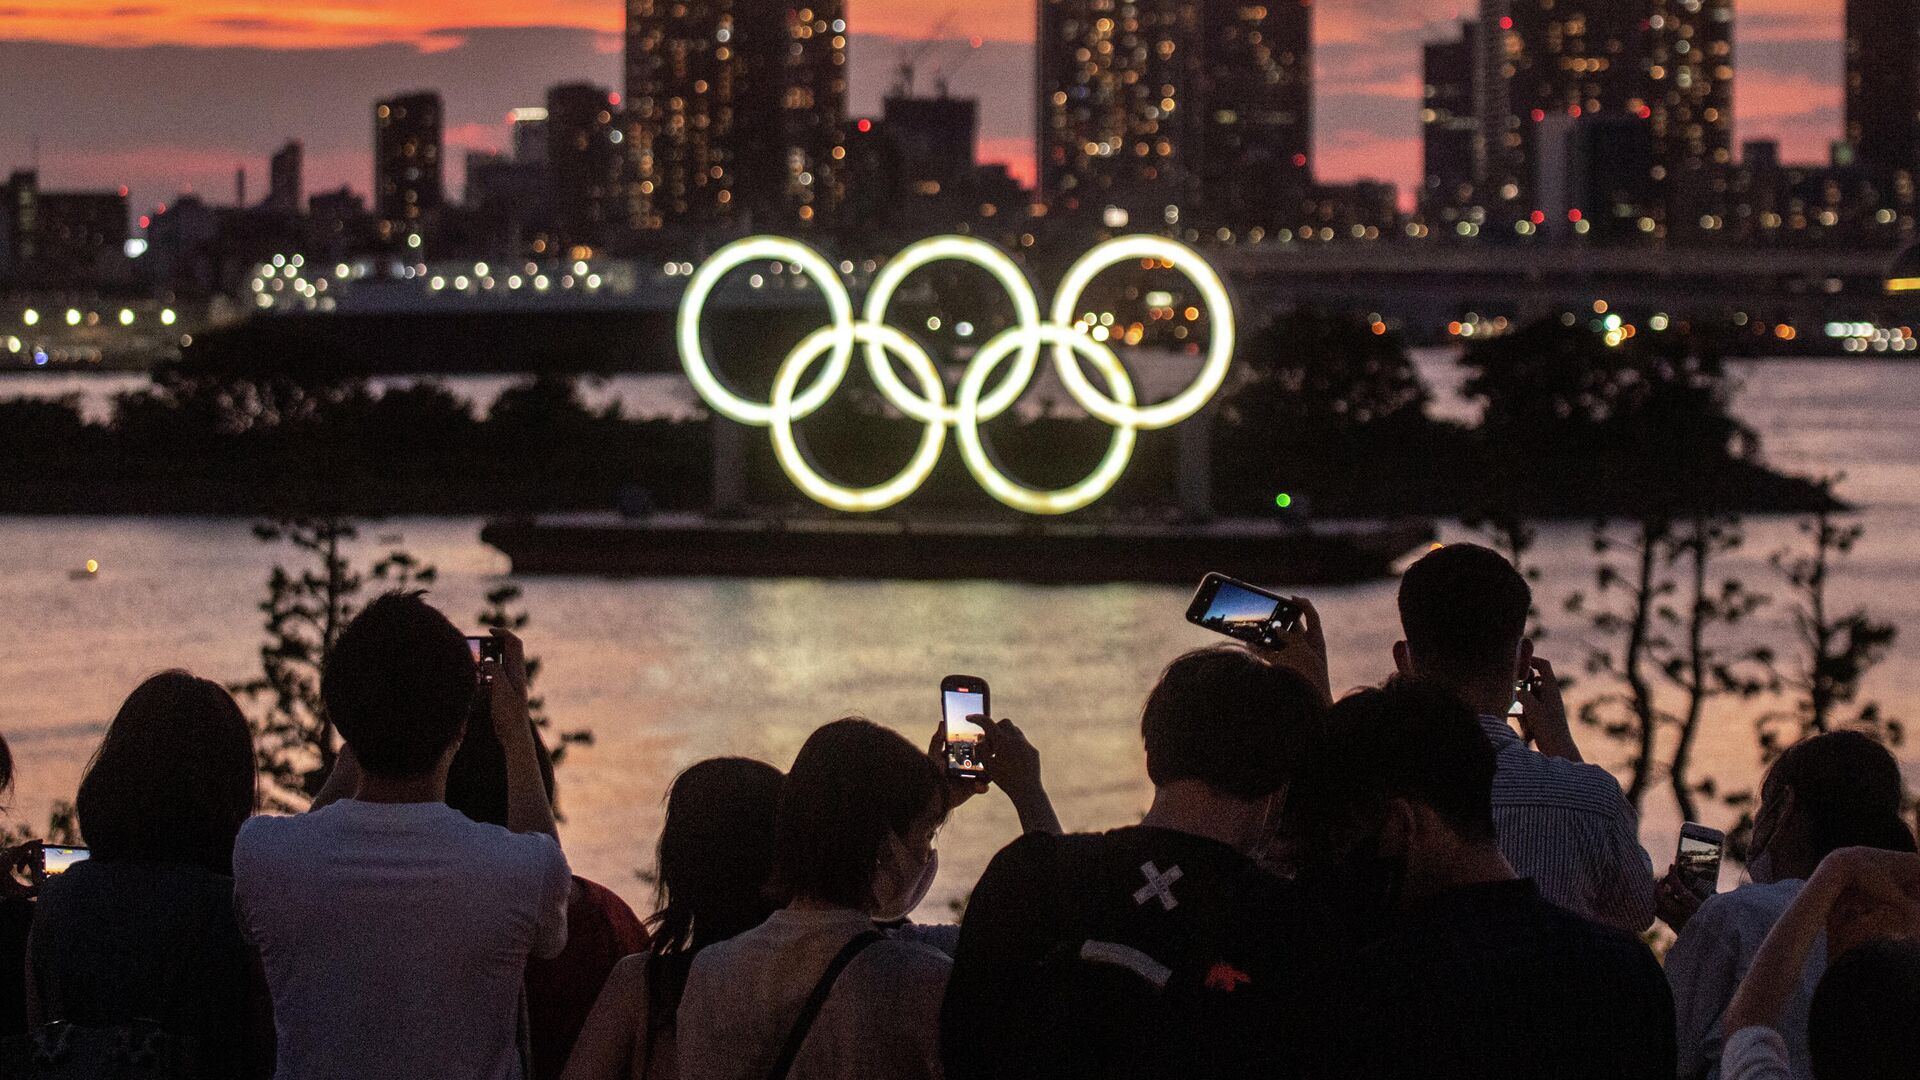 People take pictures as the Olympic rings lit up at dusk on the Odaiba waterfront in Tokyo on July 22, 2021 on the eve of the start of the Tokyo 2020 Olympic Games. (Photo by Philip FONG / AFP) - РИА Новости, 1920, 22.07.2021